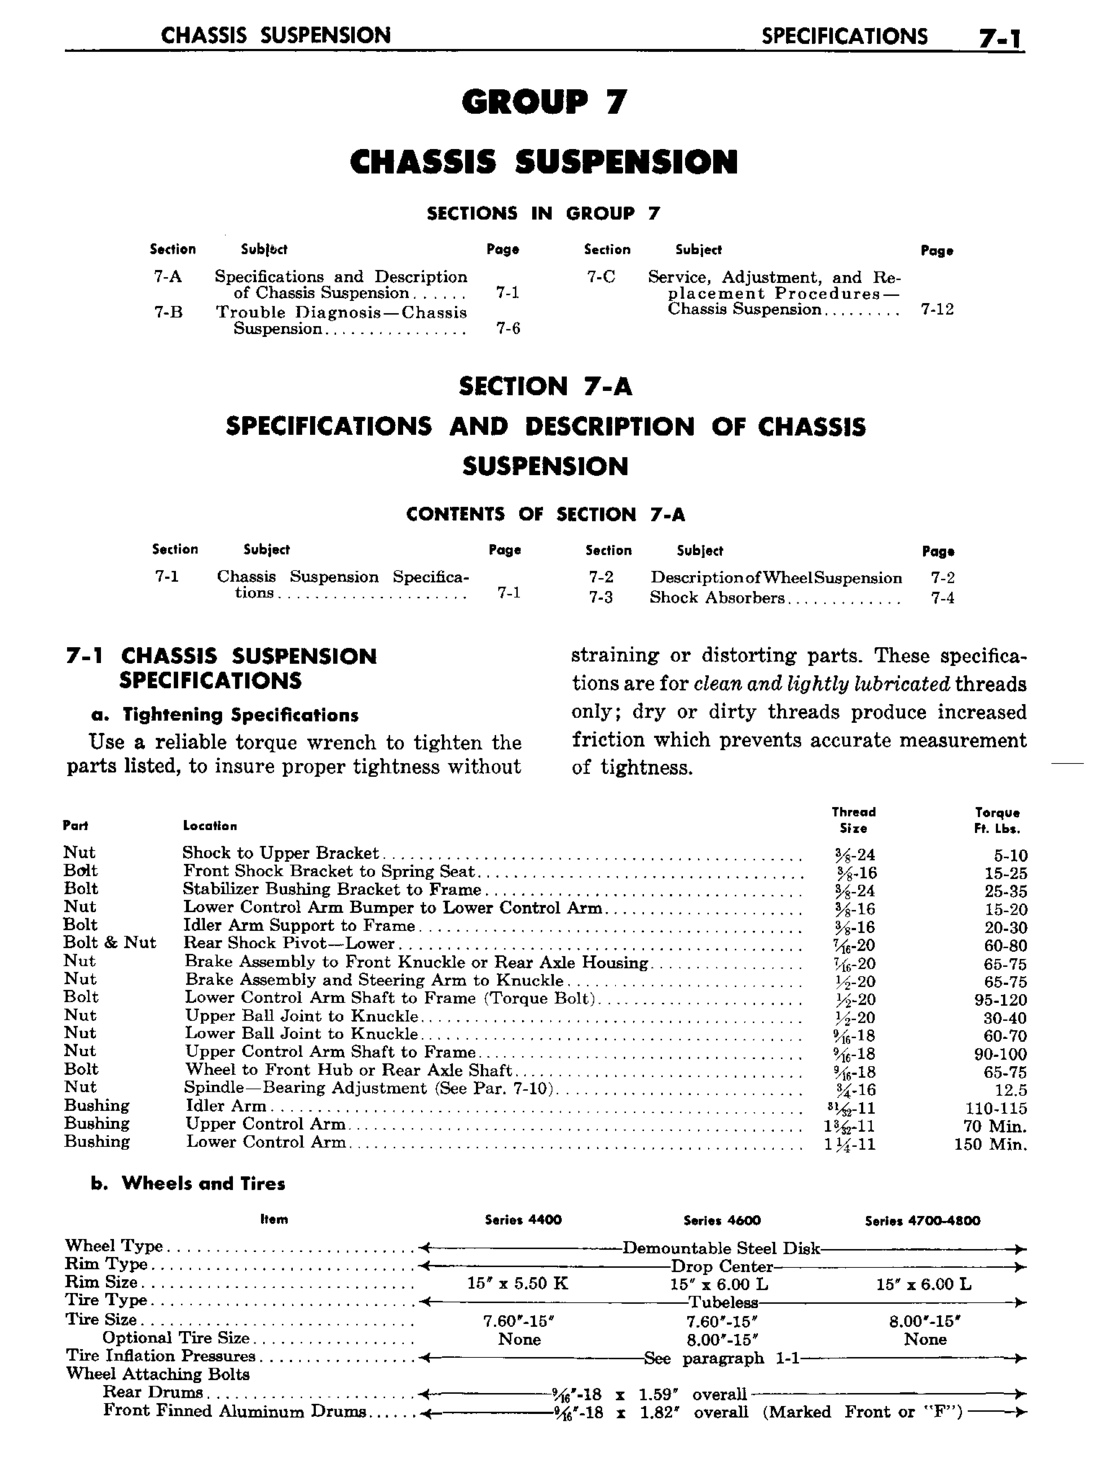 n_08 1960 Buick Shop Manual - Chassis Suspension-001-001.jpg